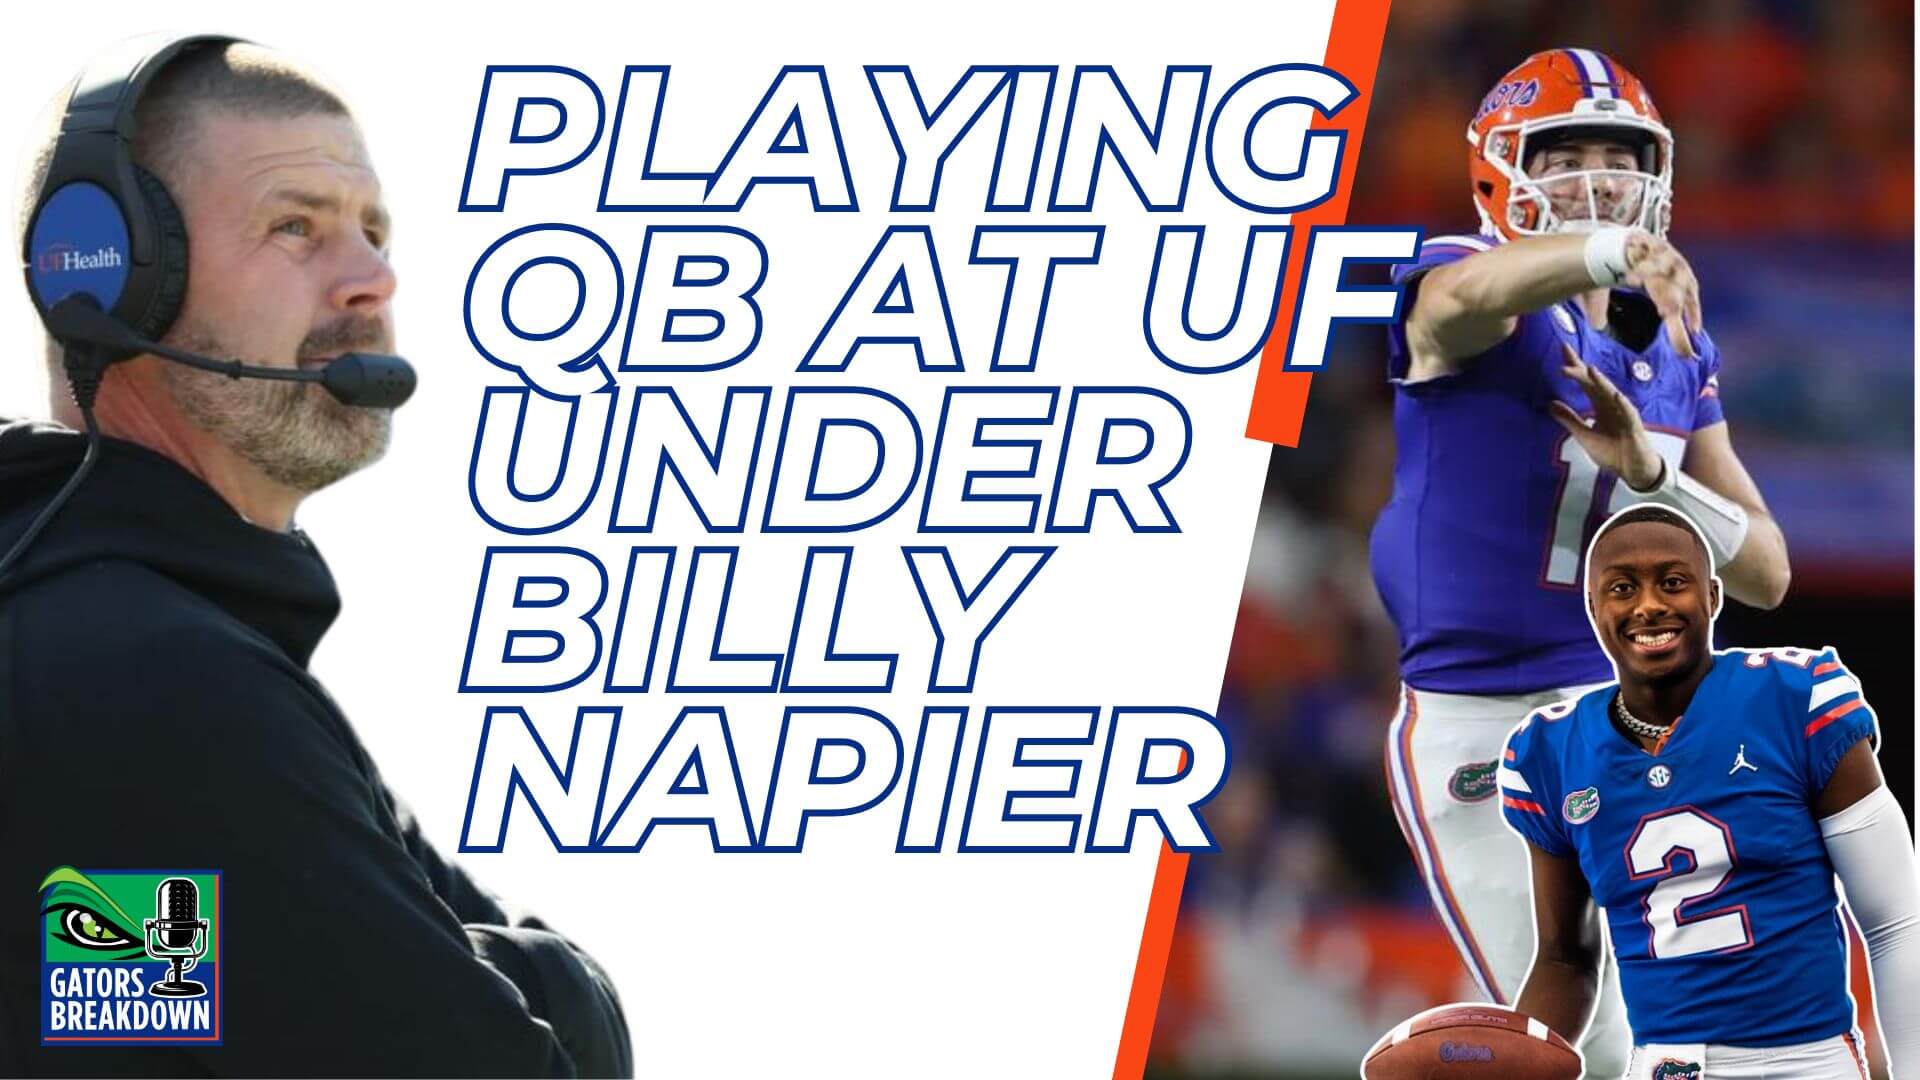 Playing QB for the Florida Gators under Billy Napier